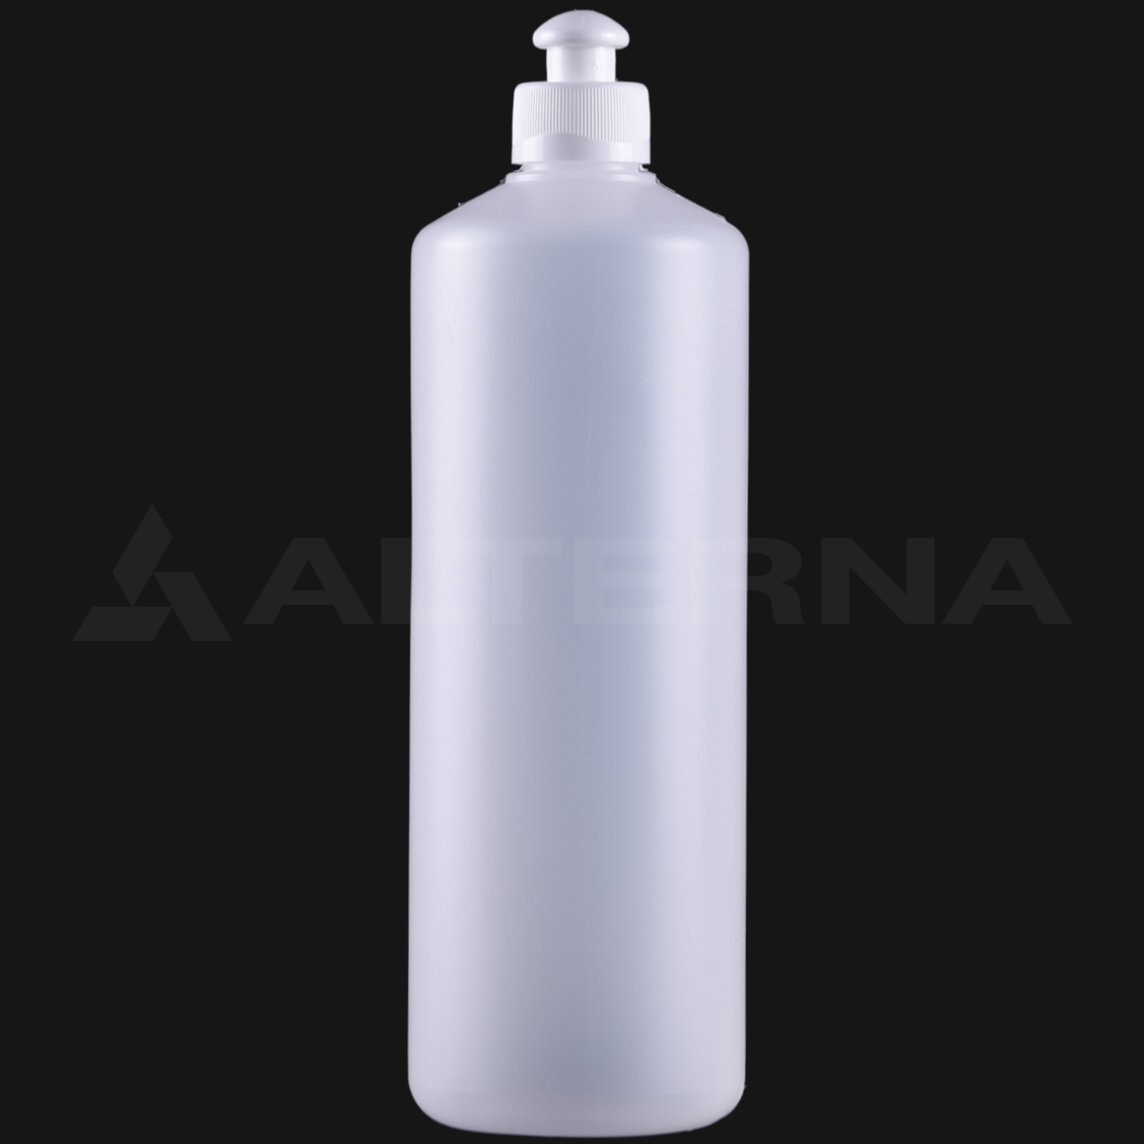 750 ml HDPE Bottle with 28 mm Push Pull Cap